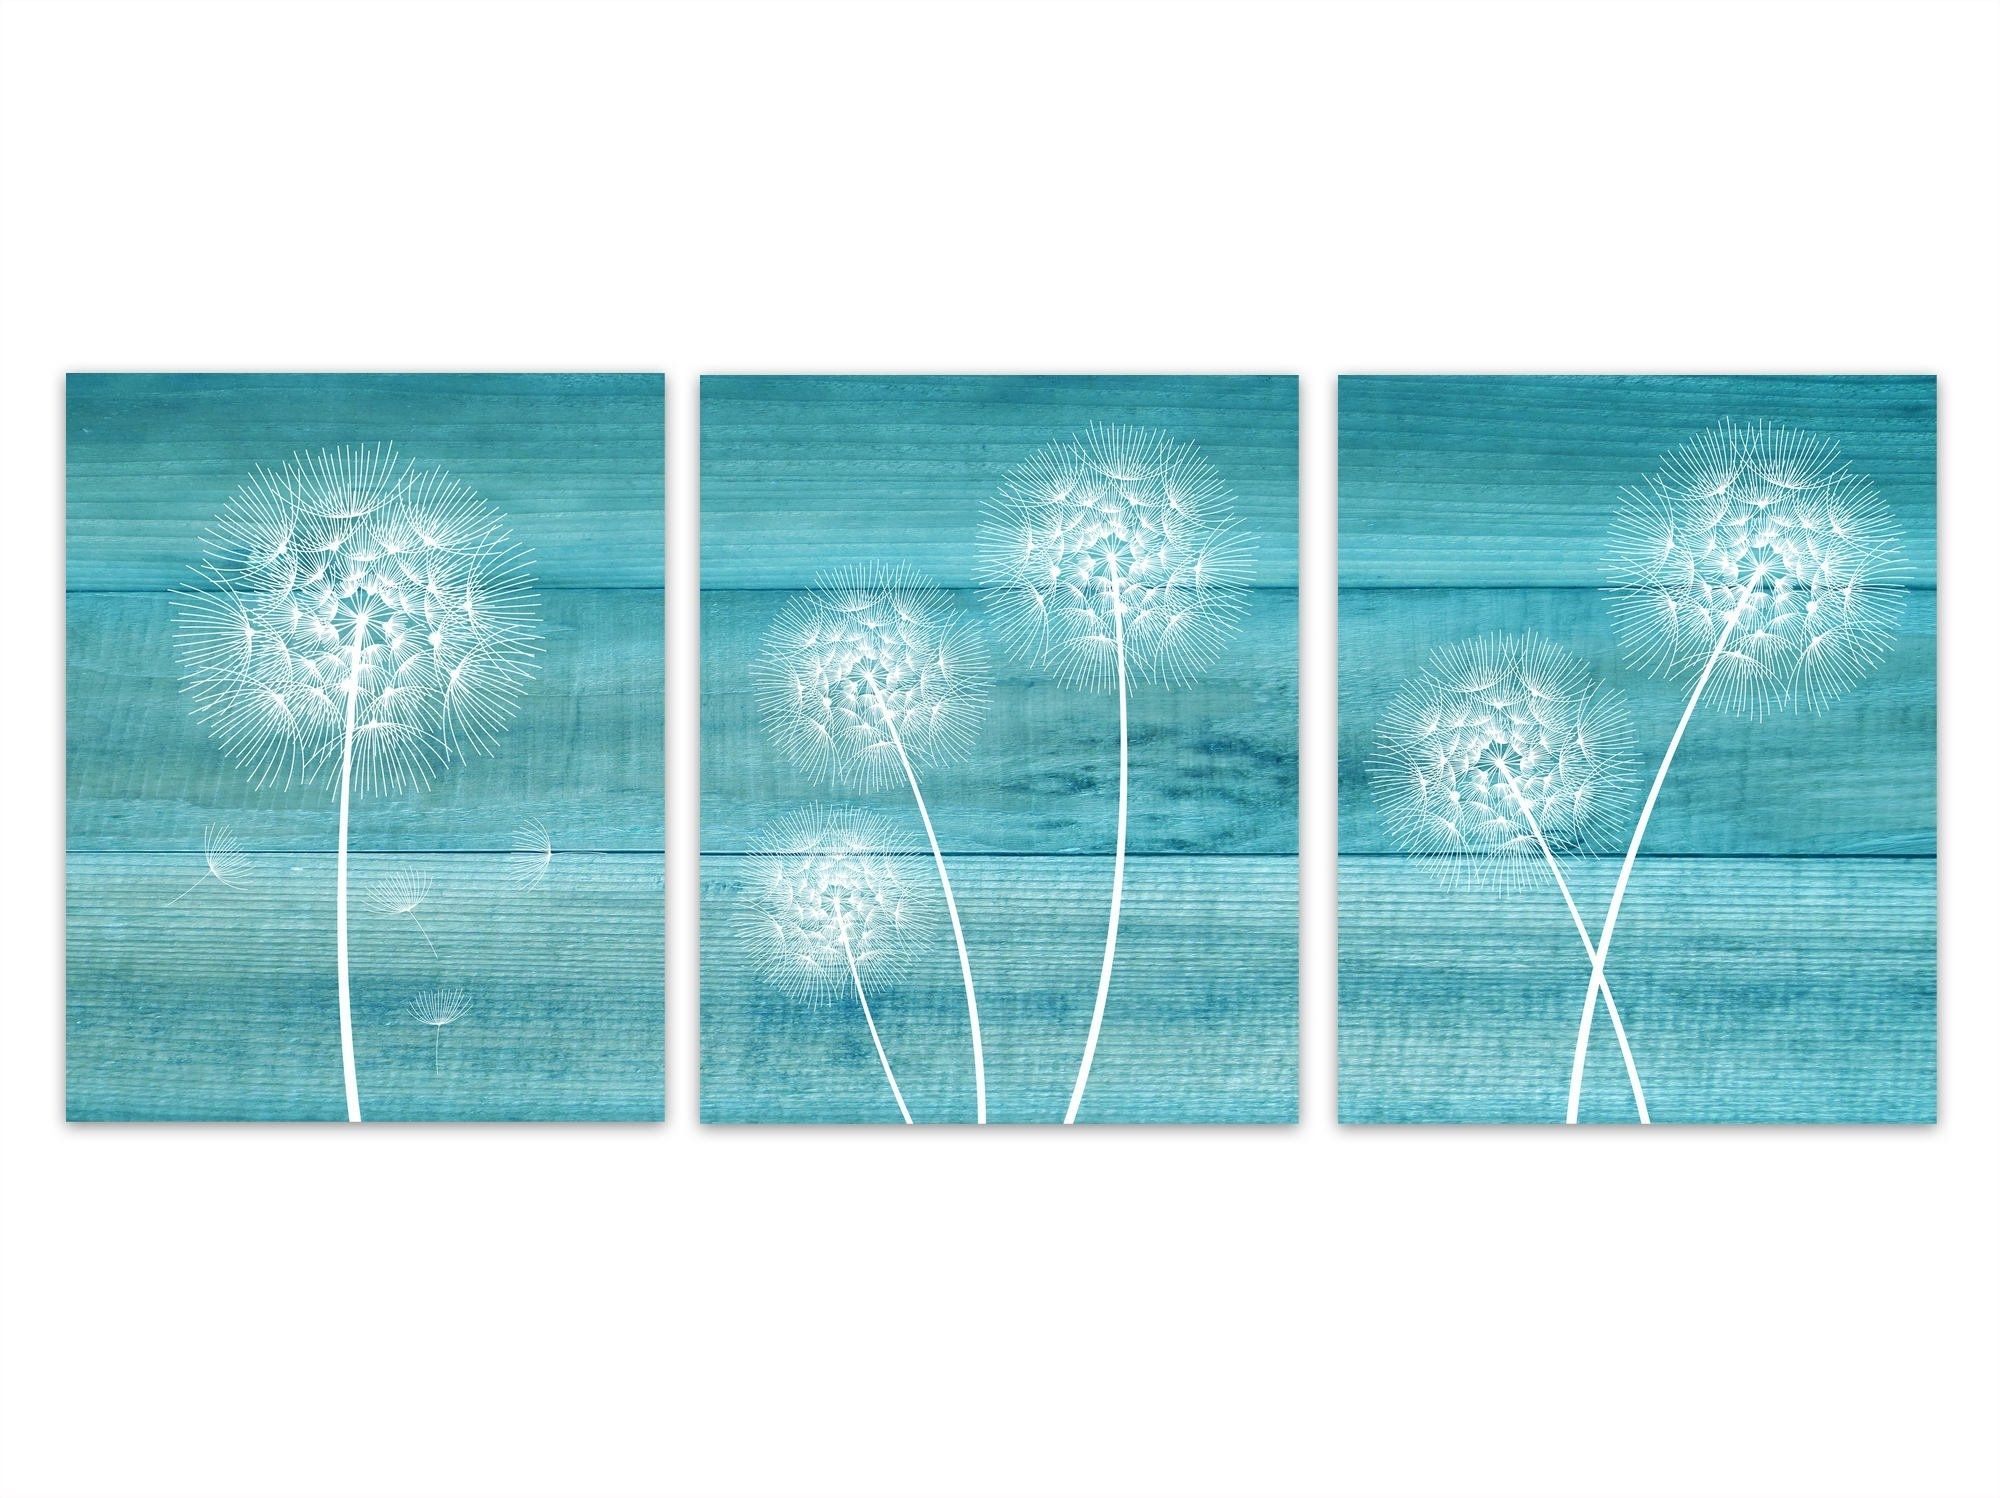 Dandelion Wall Art, Turquoise Rustic Decor, Home Decor Canvas Or With Regard To Turquoise Wall Art (View 12 of 20)